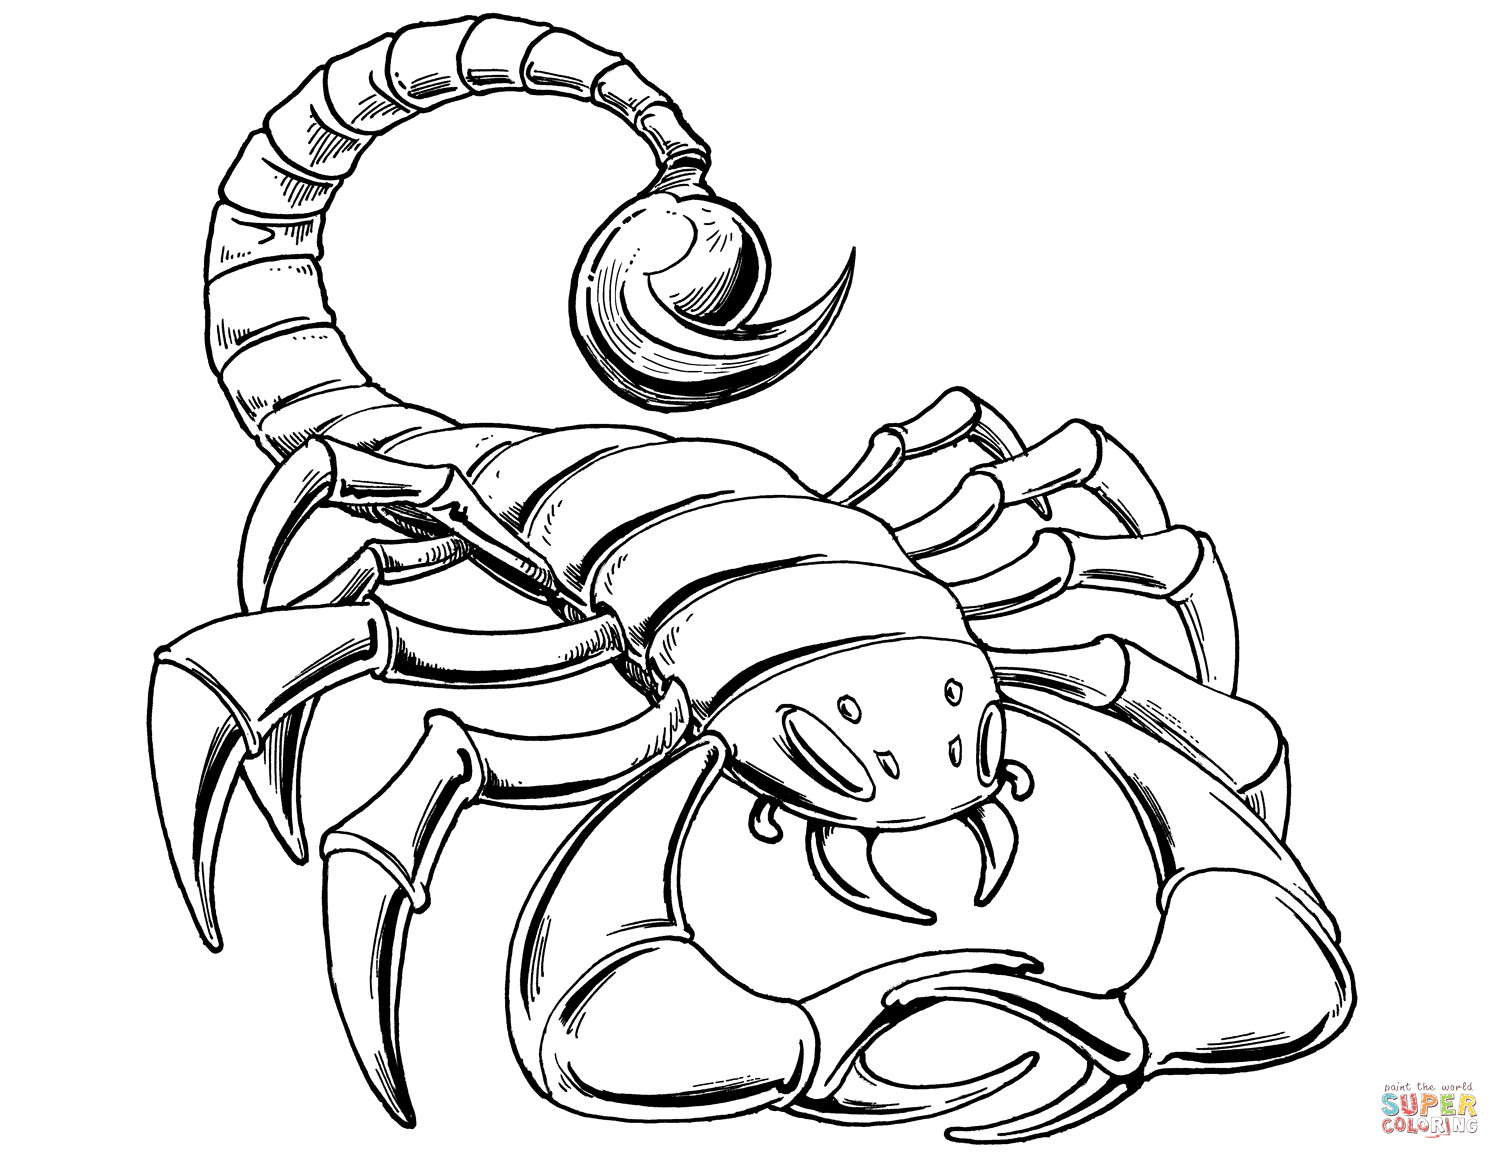 Scorpion Coloring Pages
 Prehistoric Scorpion coloring page